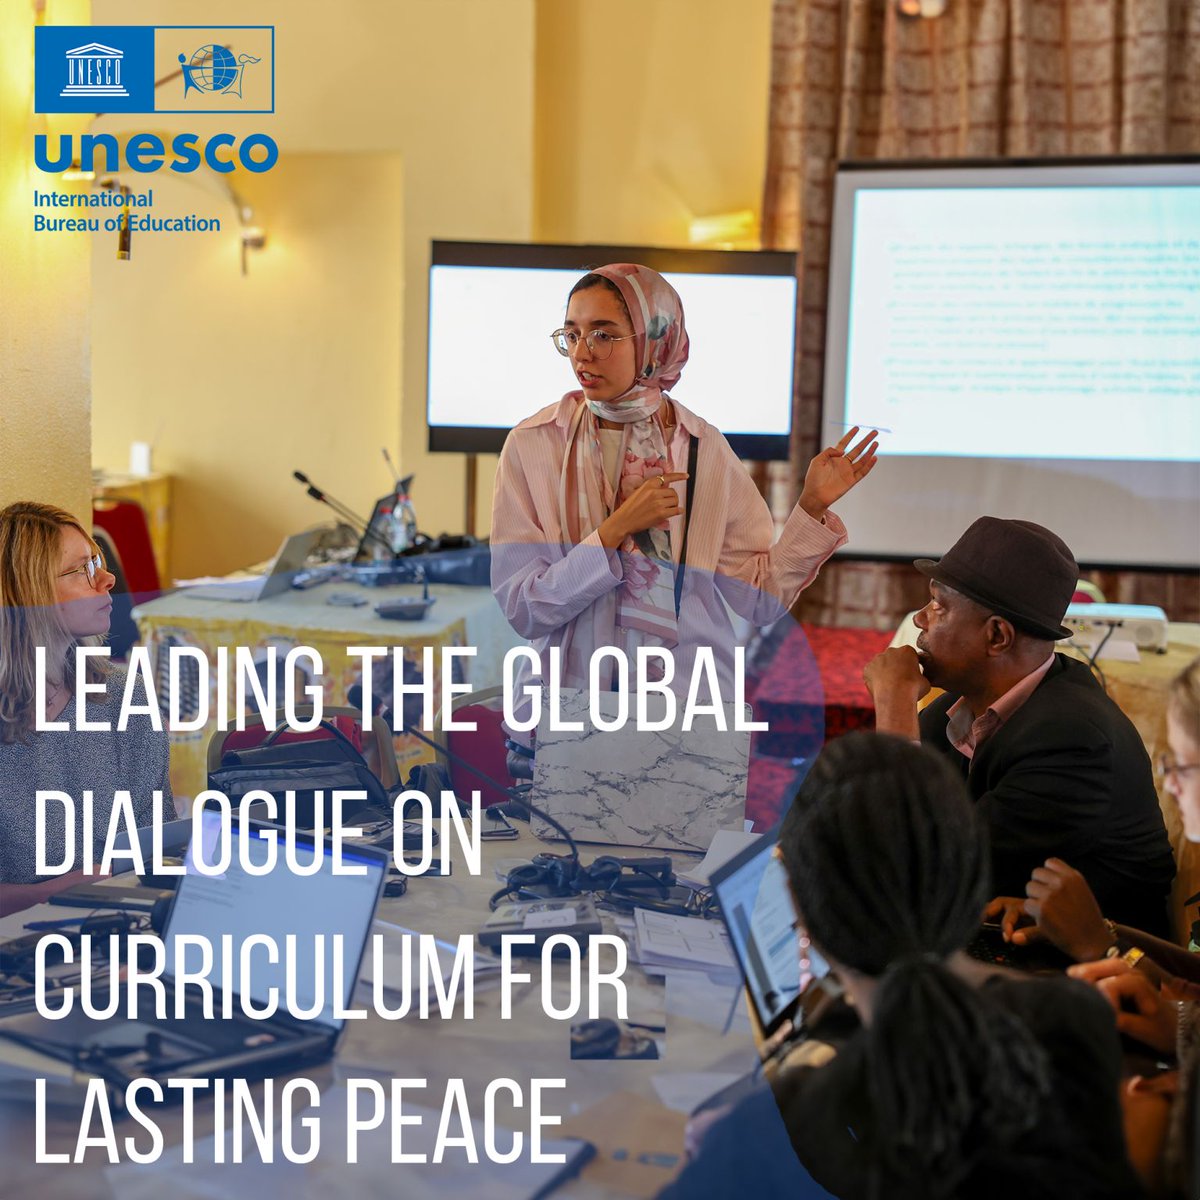 UNESCO-IBE leads the global dialogue on curriculum and learning for lasting peace through discussion, research, and knowledge products. Read more➡️ rb.gy/mmalzp #Curriculum #EducationDay #PeaceBuilding